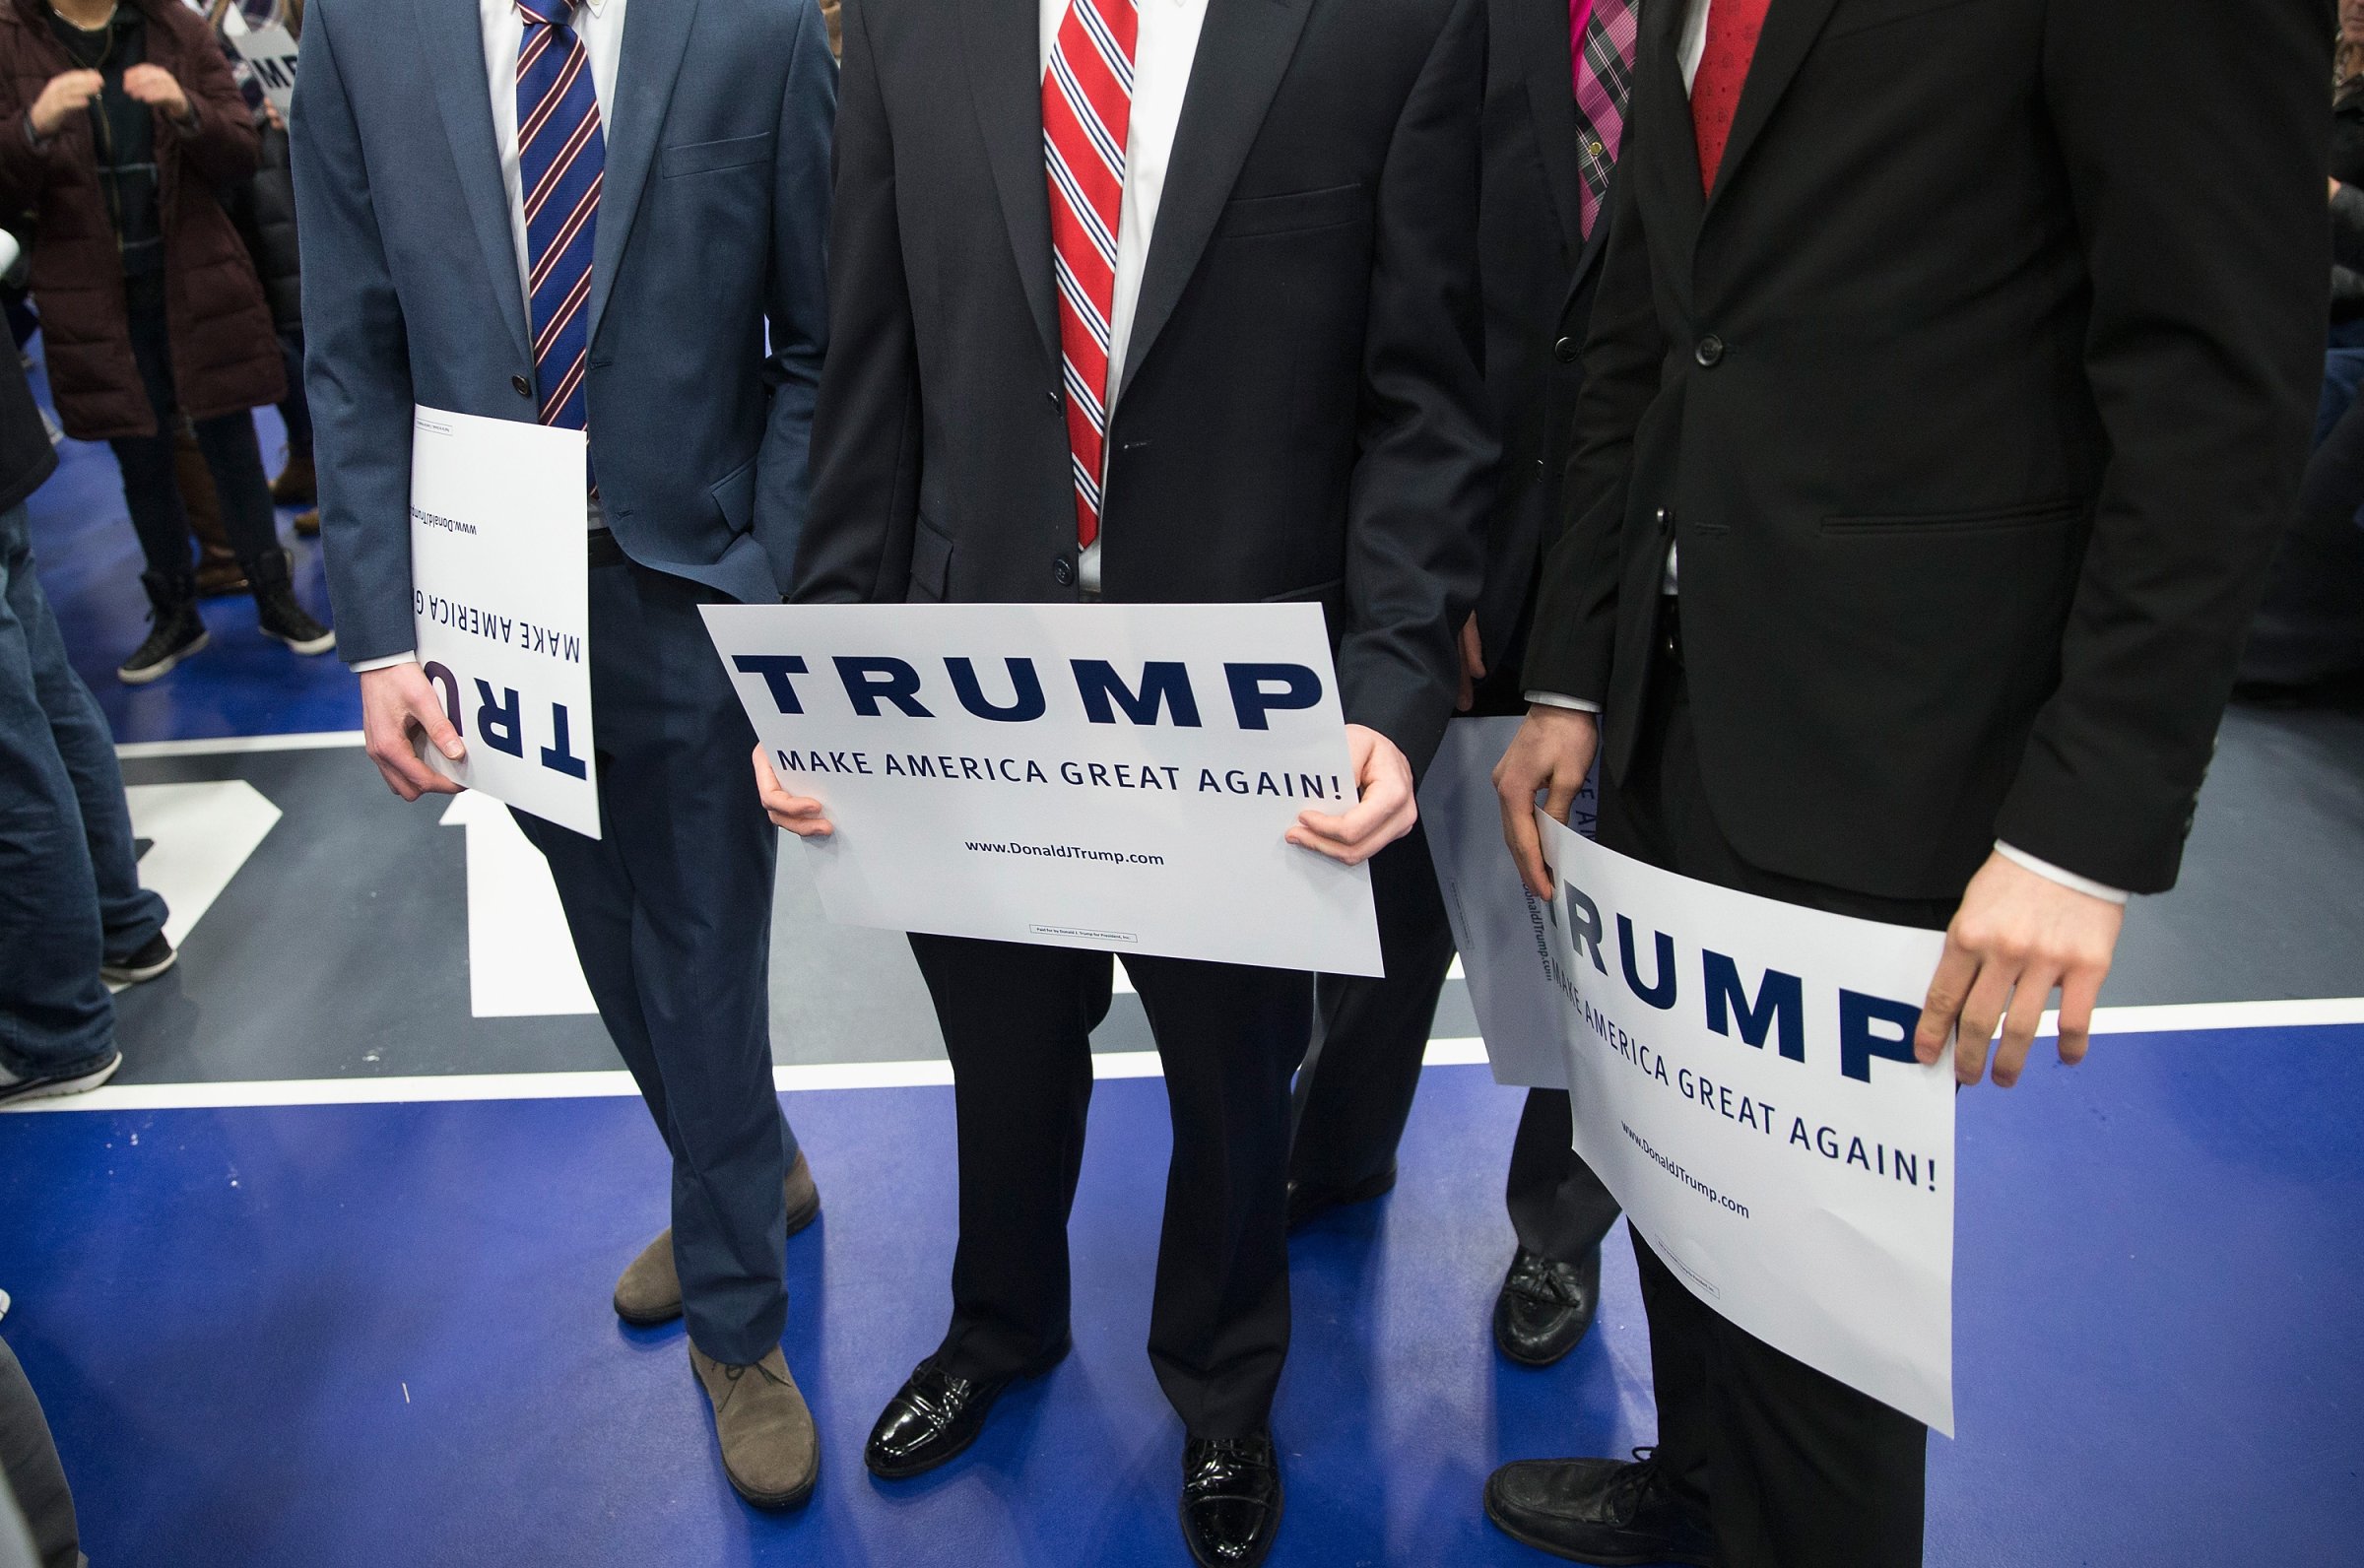 Men hold signs while waiting for Republican presidential candidate Donald Trump to arrive for a rally at Macomb Community College in Warren, Mich., on March 4, 2016.